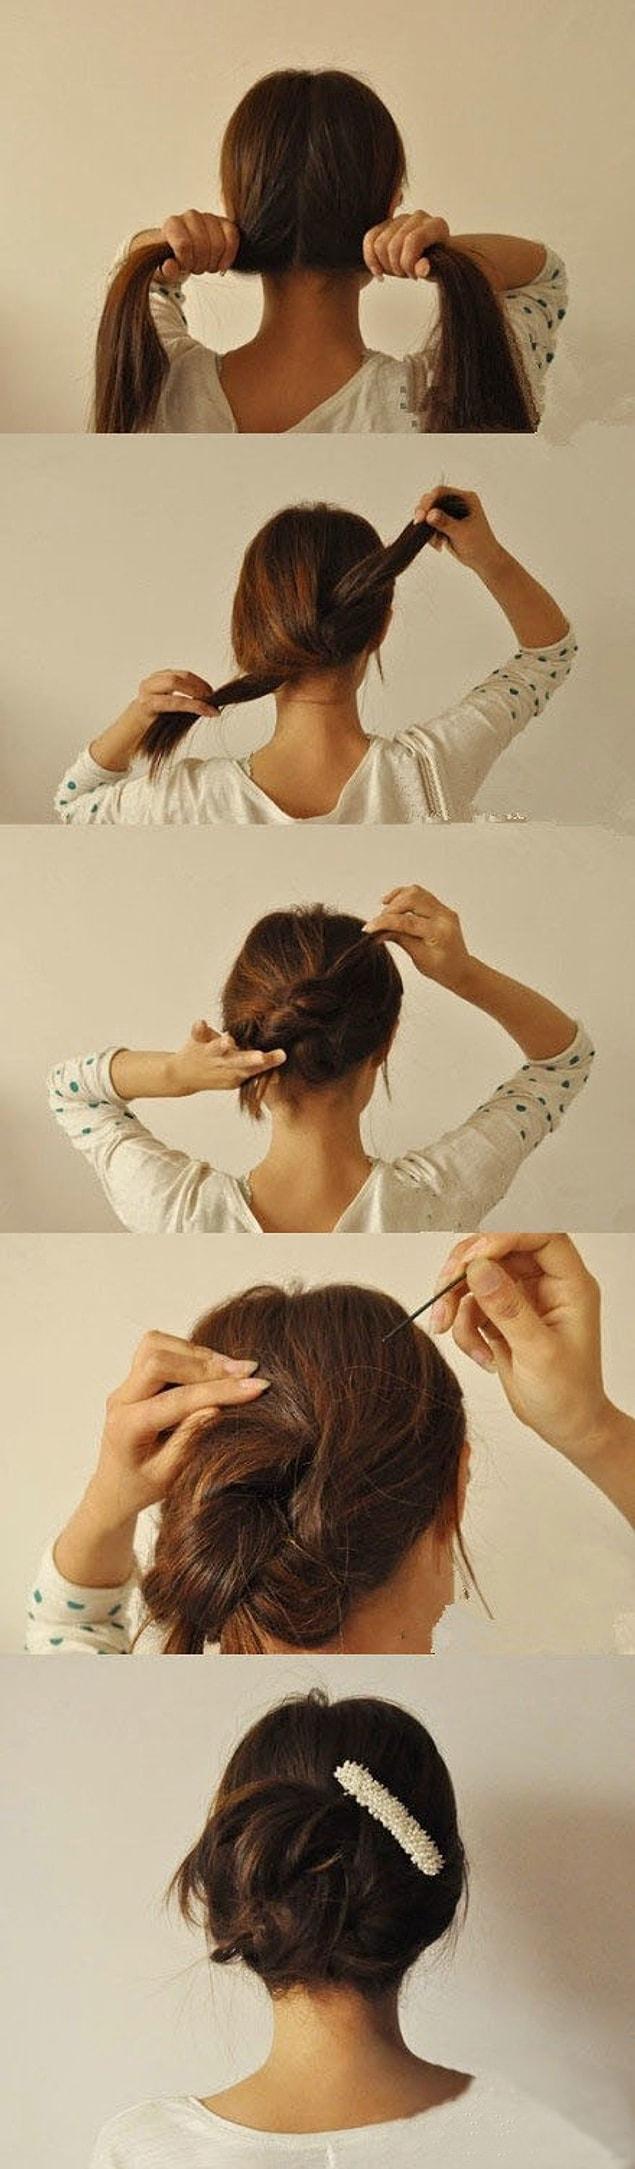 1. Split your hair in the middle, knot, twist and secure it with bobby pins.